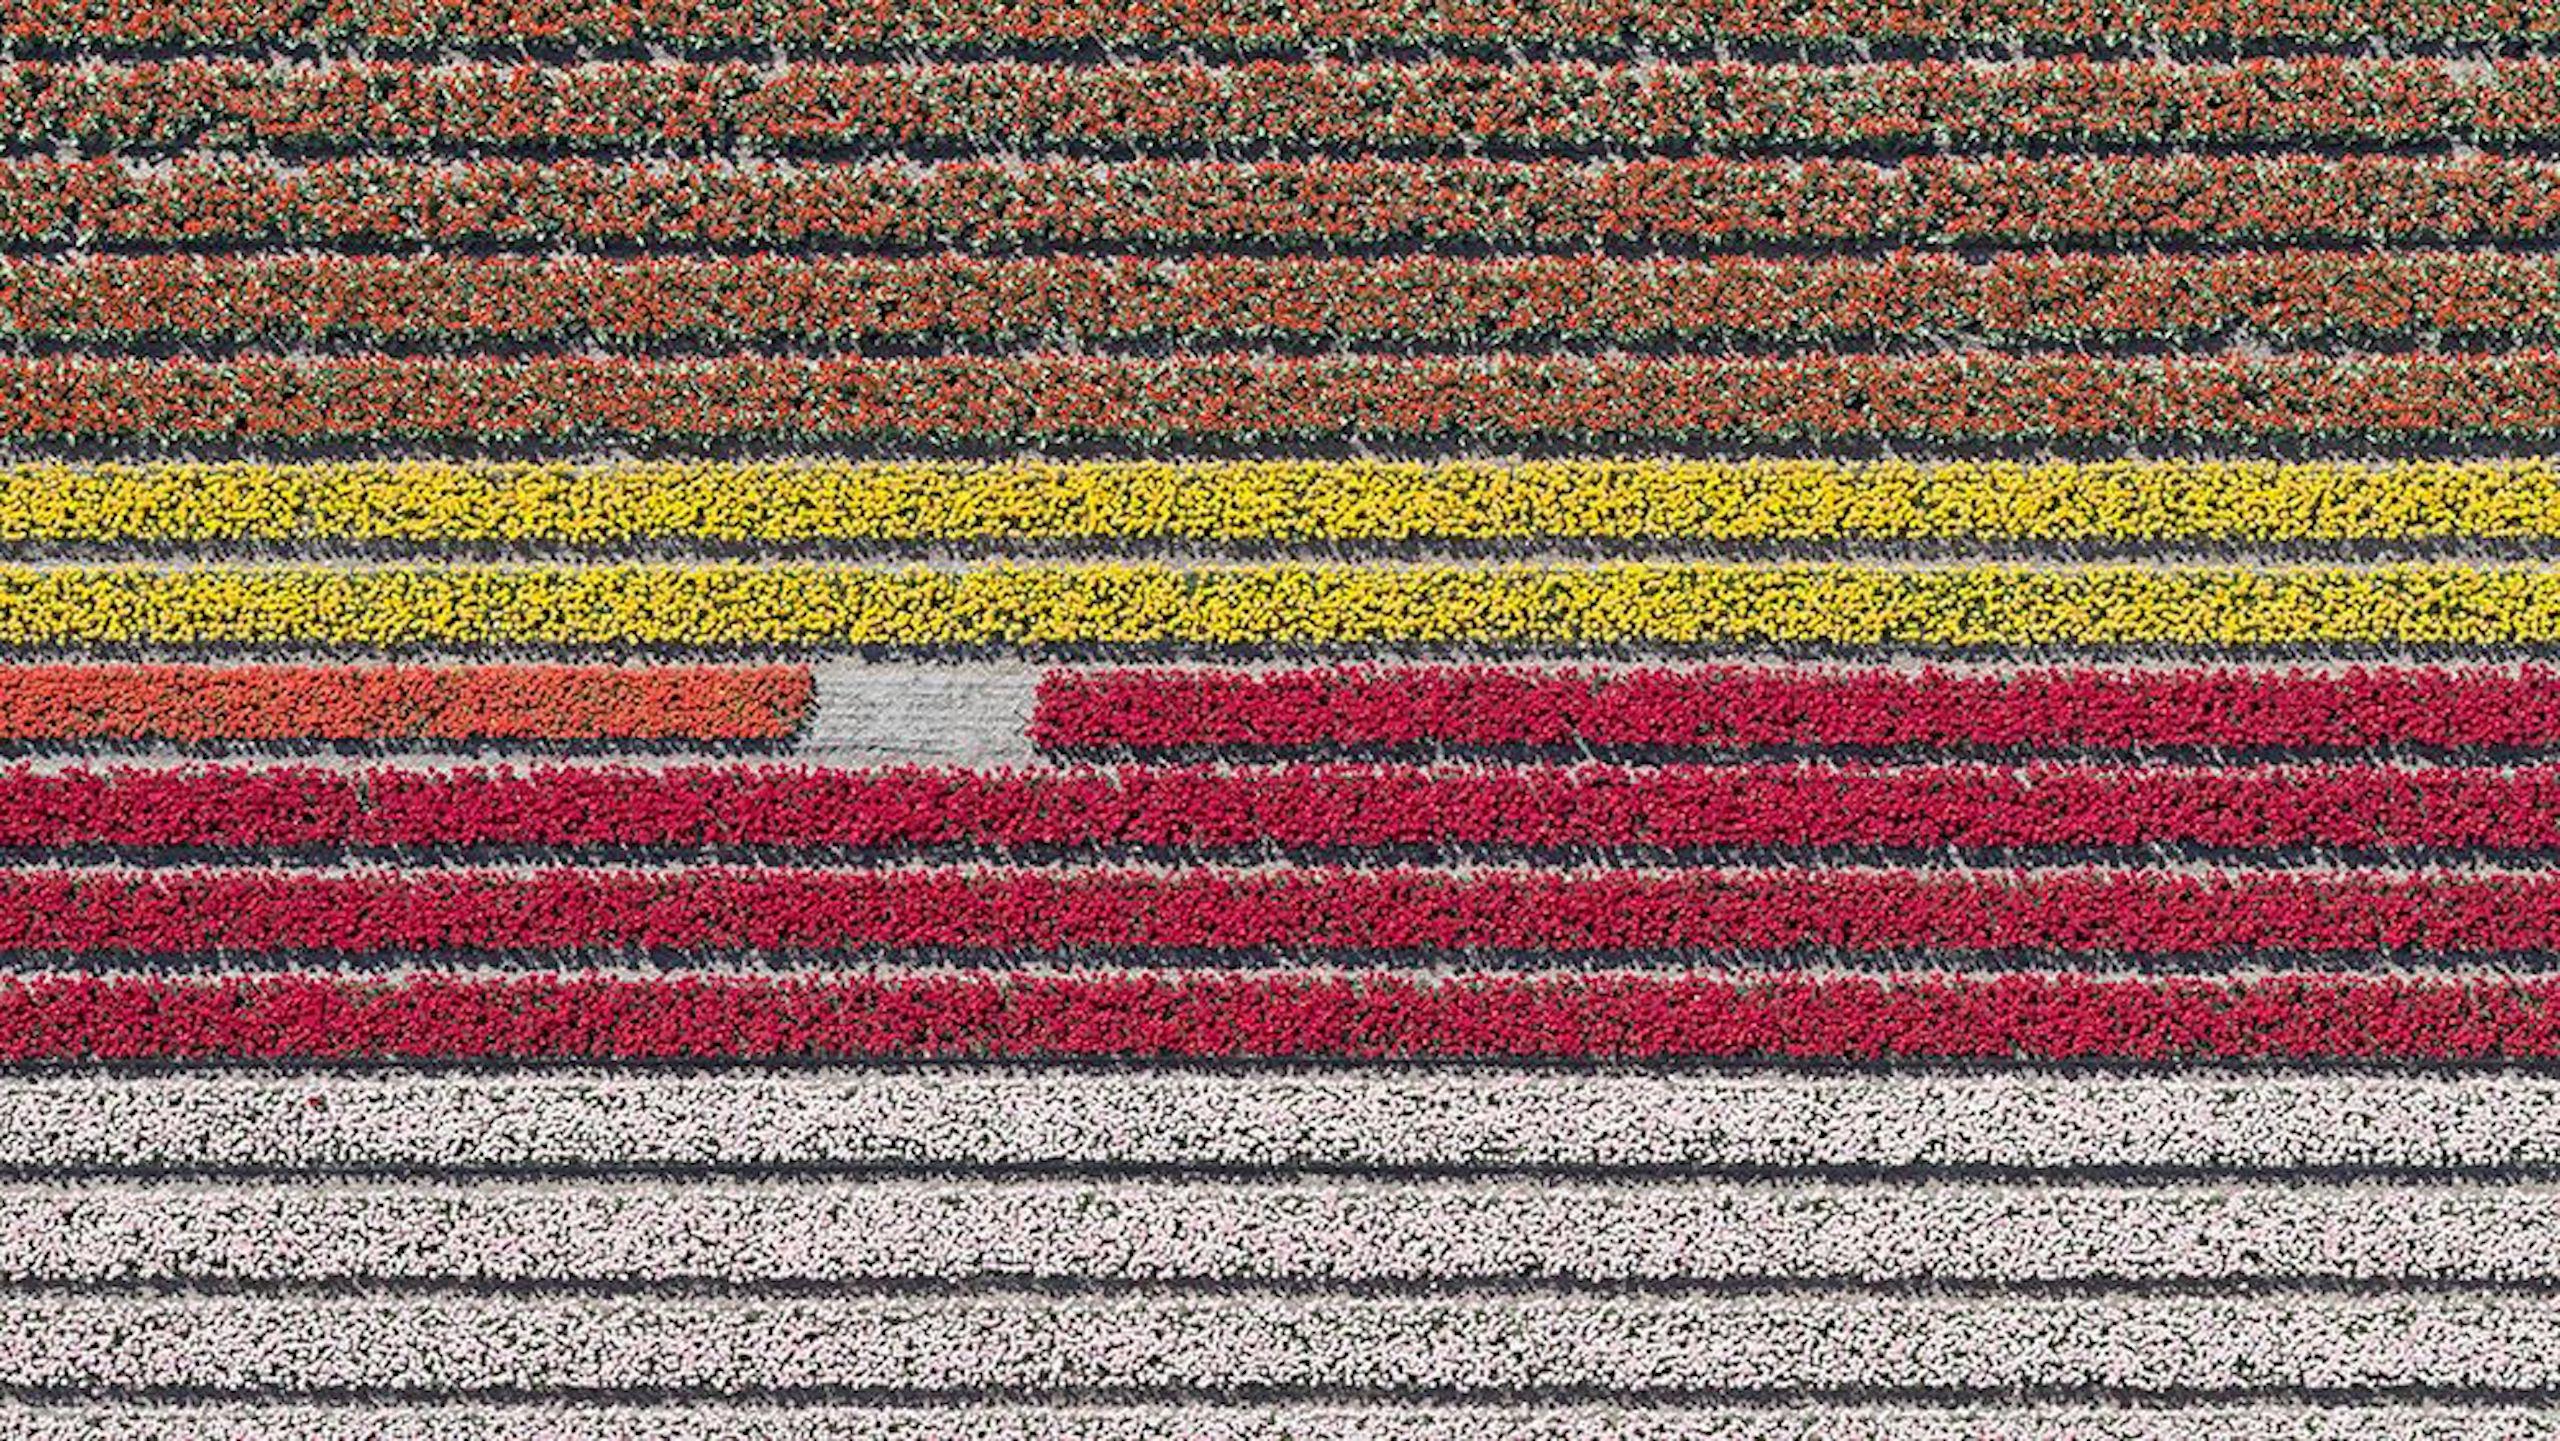 Aerial Views, Tulip Fields 23 is a limited-edition photograph by German contemporary artist Bernhard Lang. 

This photograph is sold unframed as a print only. It is available in 3 dimensions:
*60 × 107 cm (23.6" × 42.1"), edition of 10 copies
*84 ×